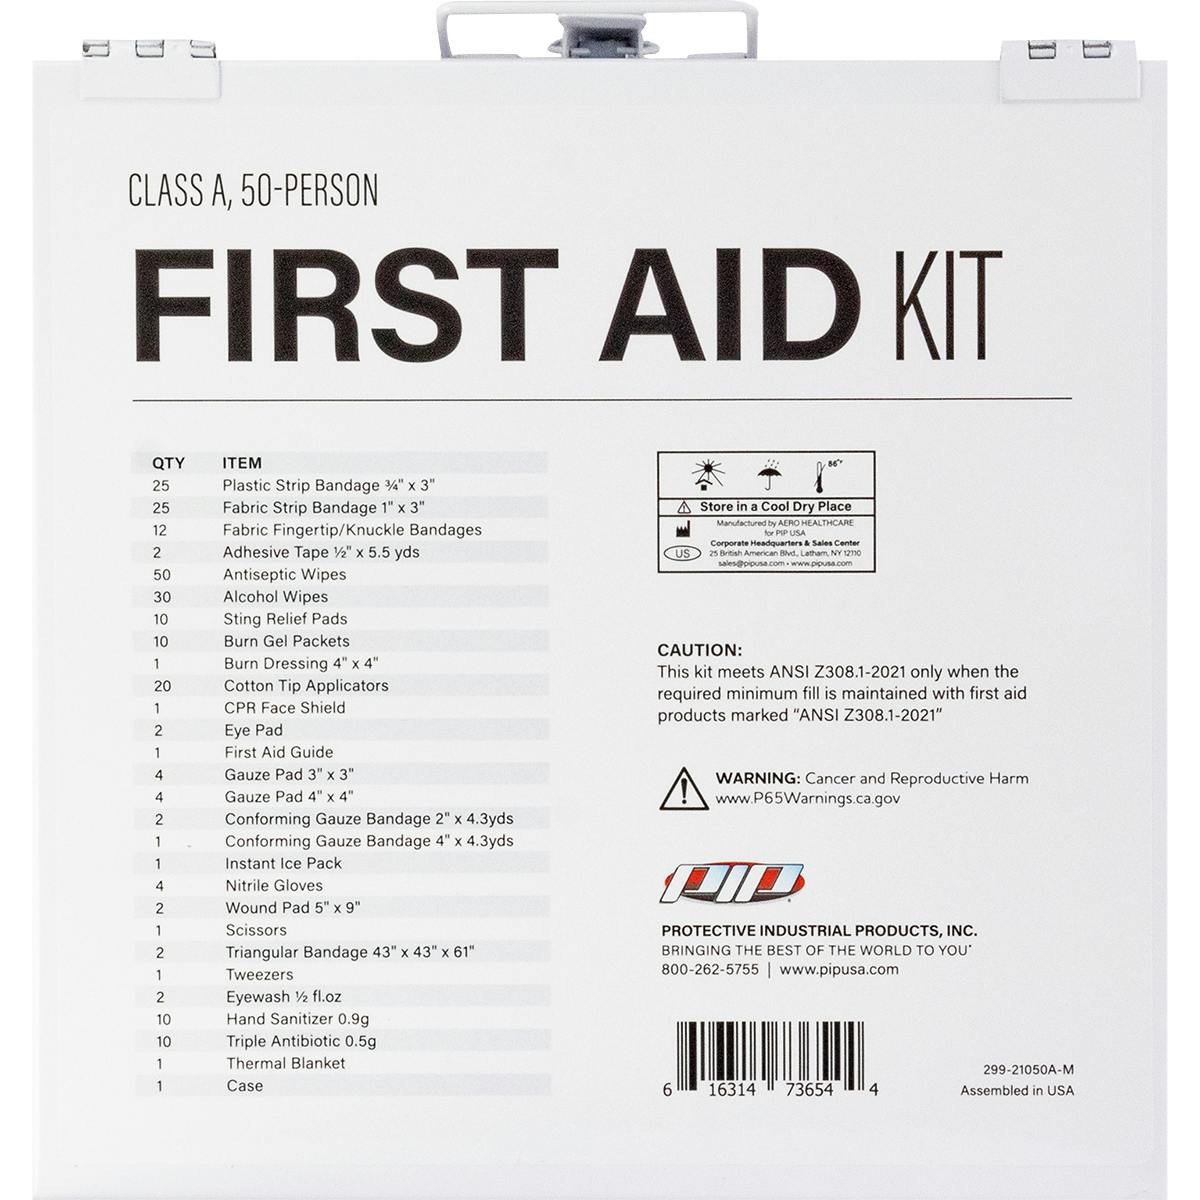 ANSI Class A Waterproof First Aid Kit - 50 Person, White (299-21050A-M) - KIT_1